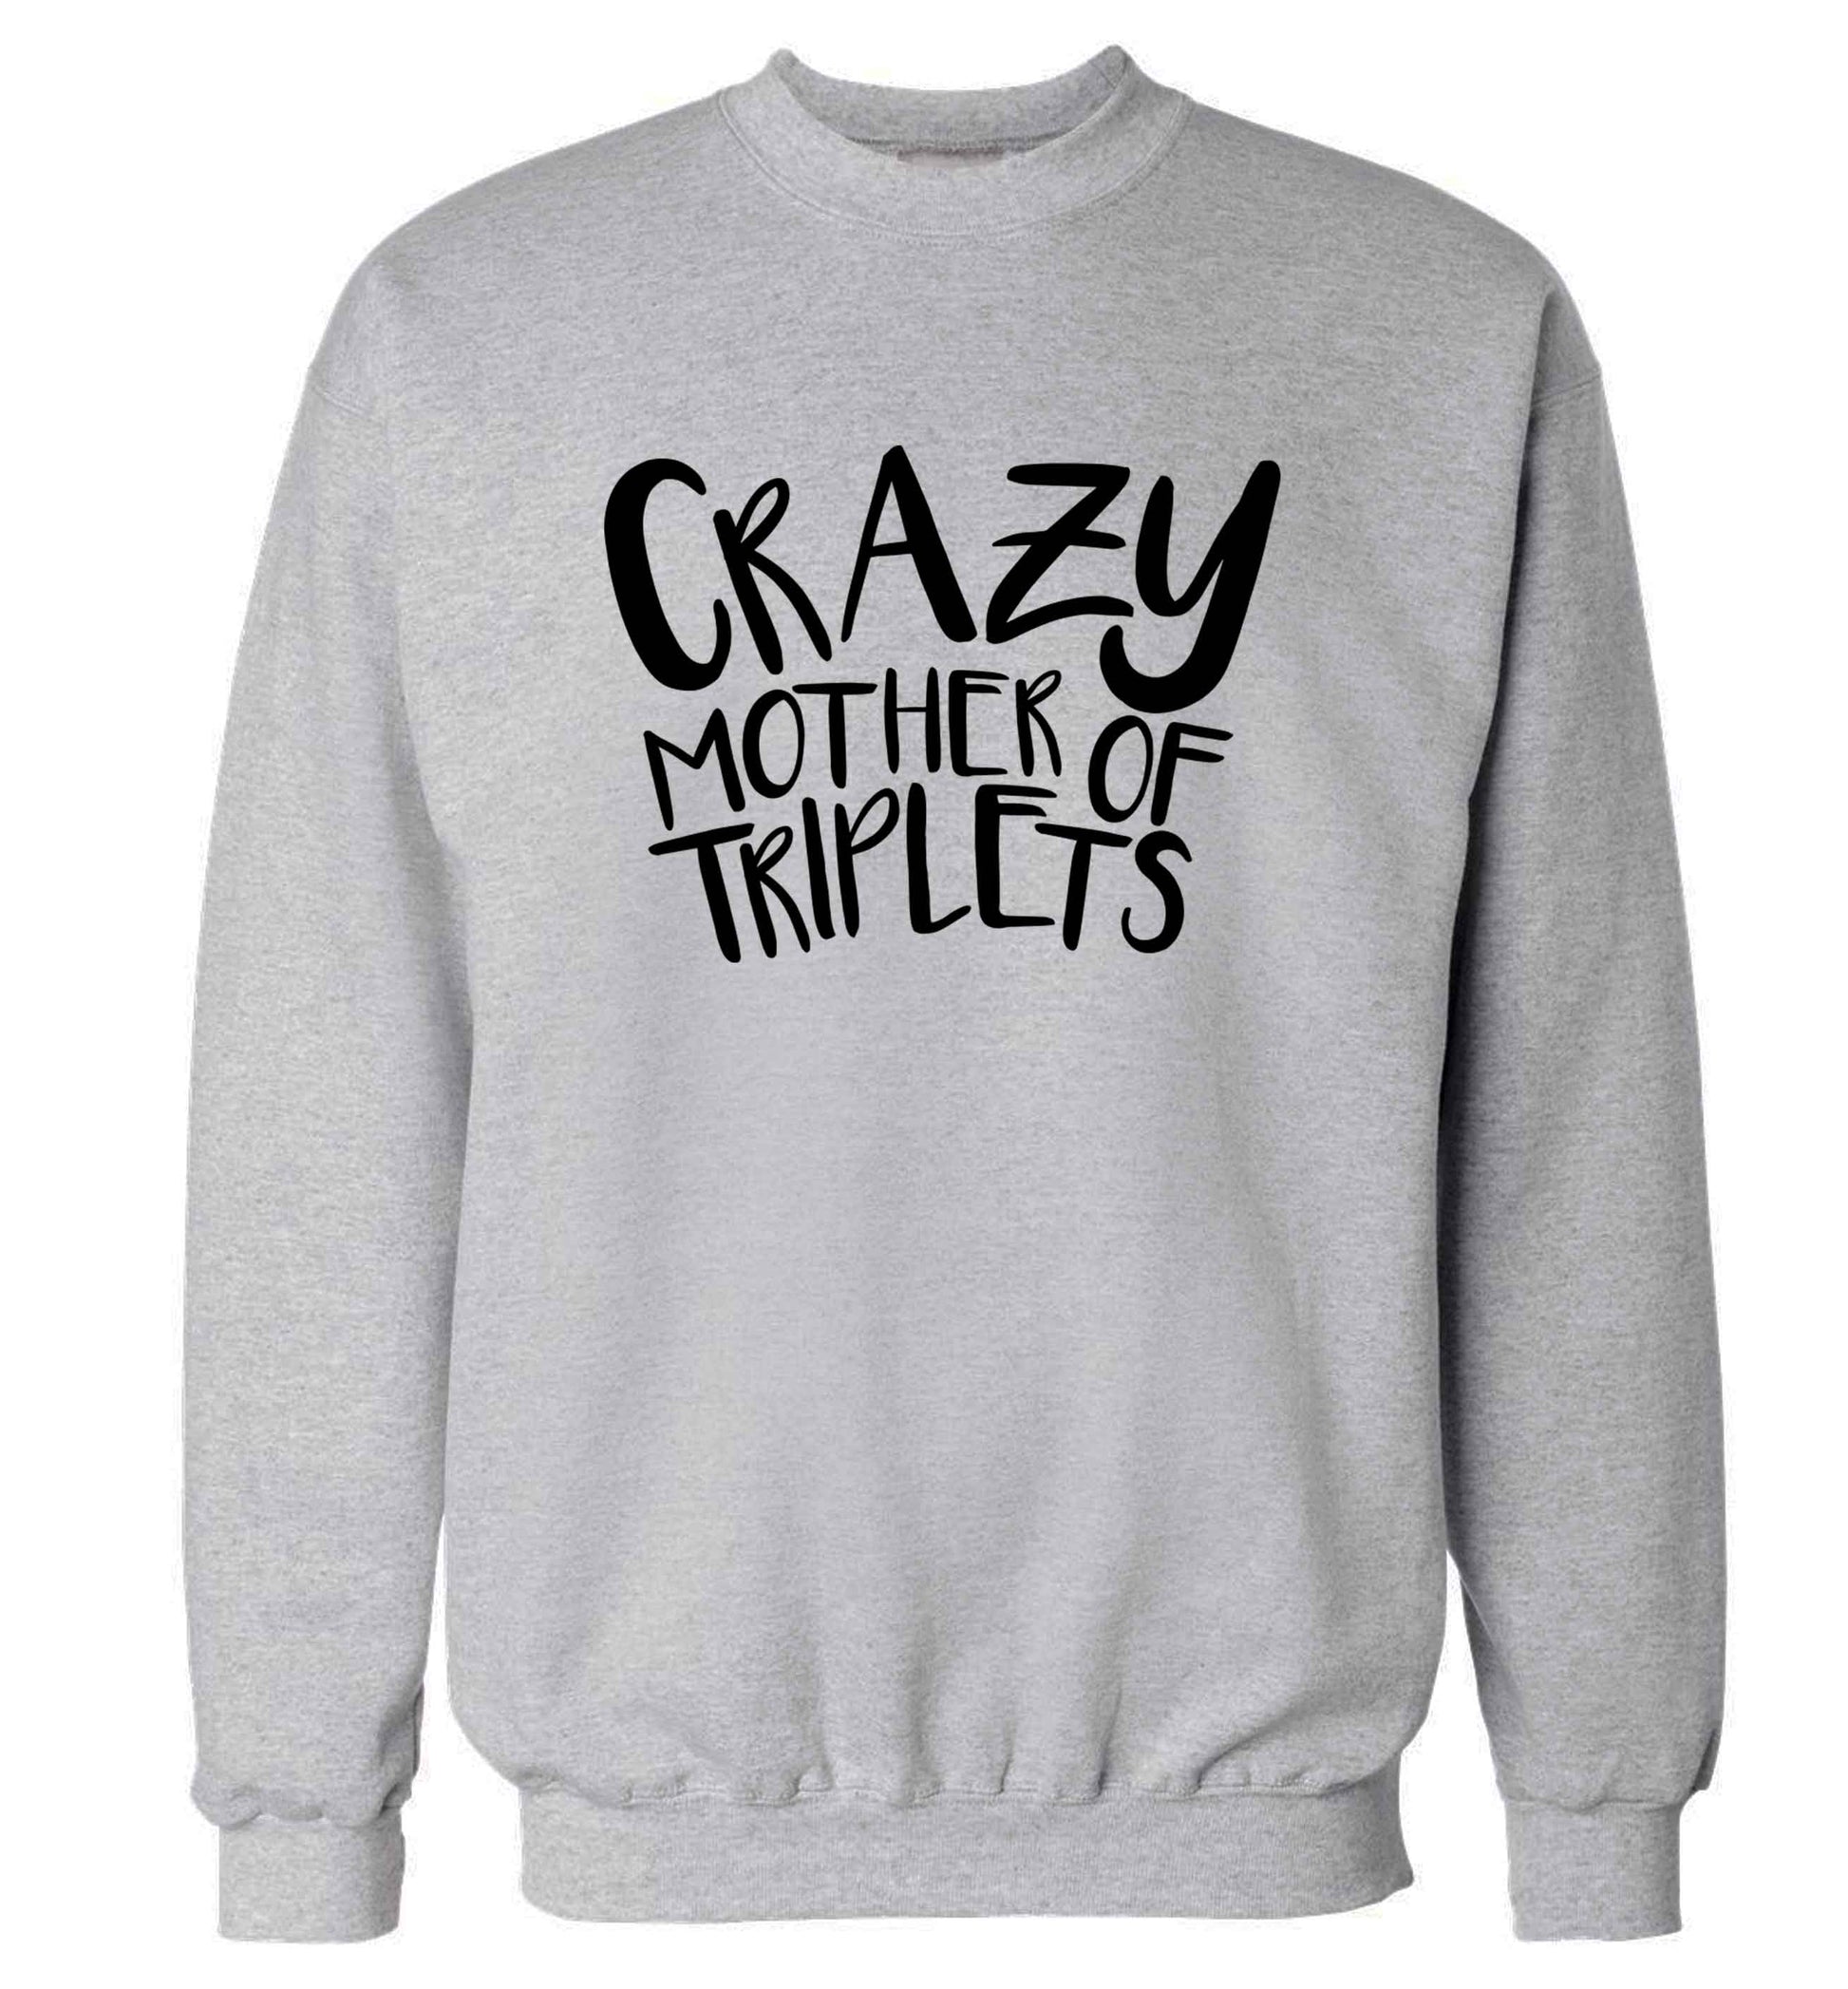 Crazy mother of triplets adult's unisex grey sweater 2XL